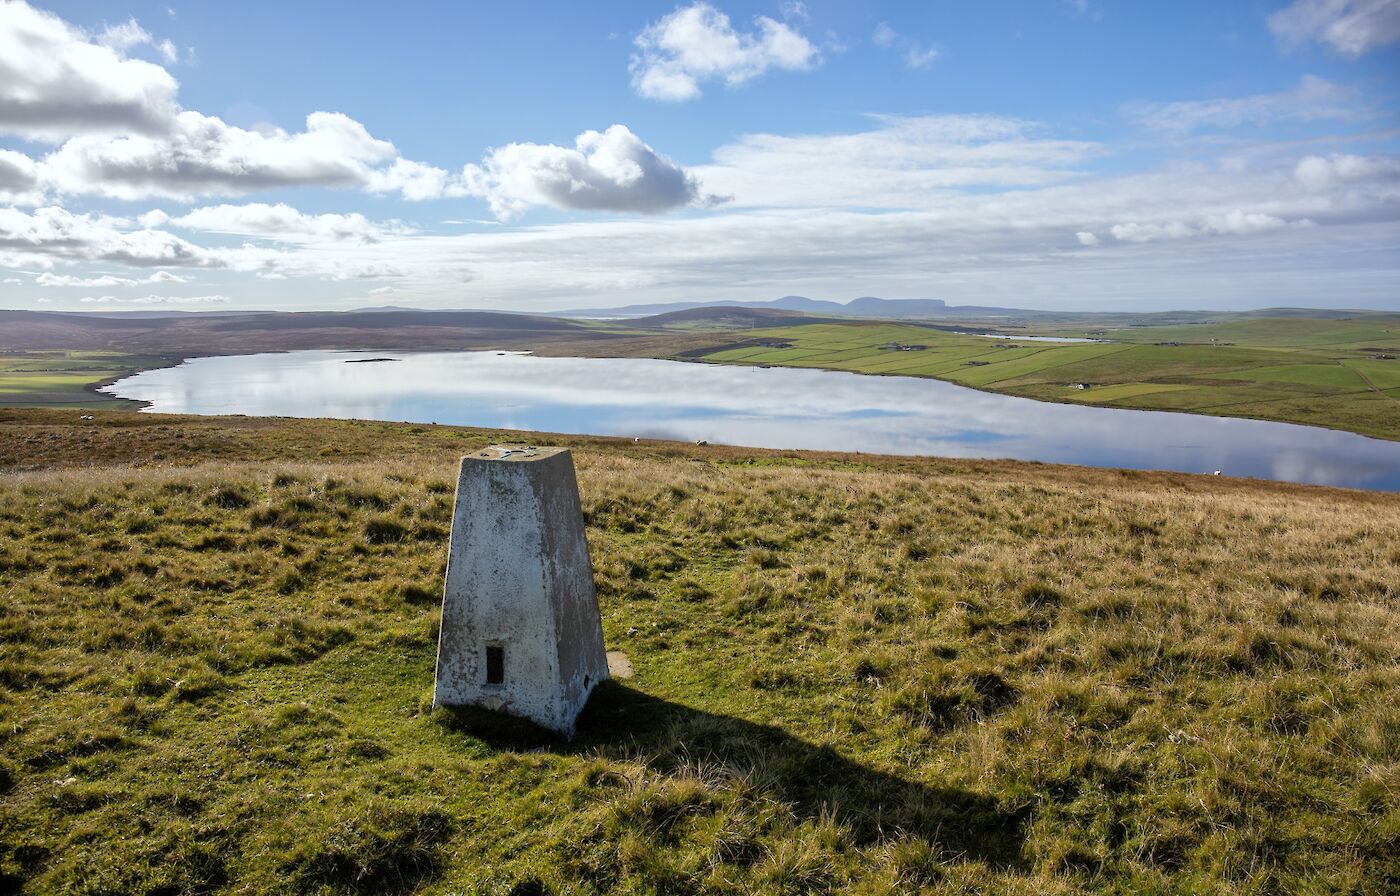 View over Swannay loch from Costa, Orkney - image by Iain Knox